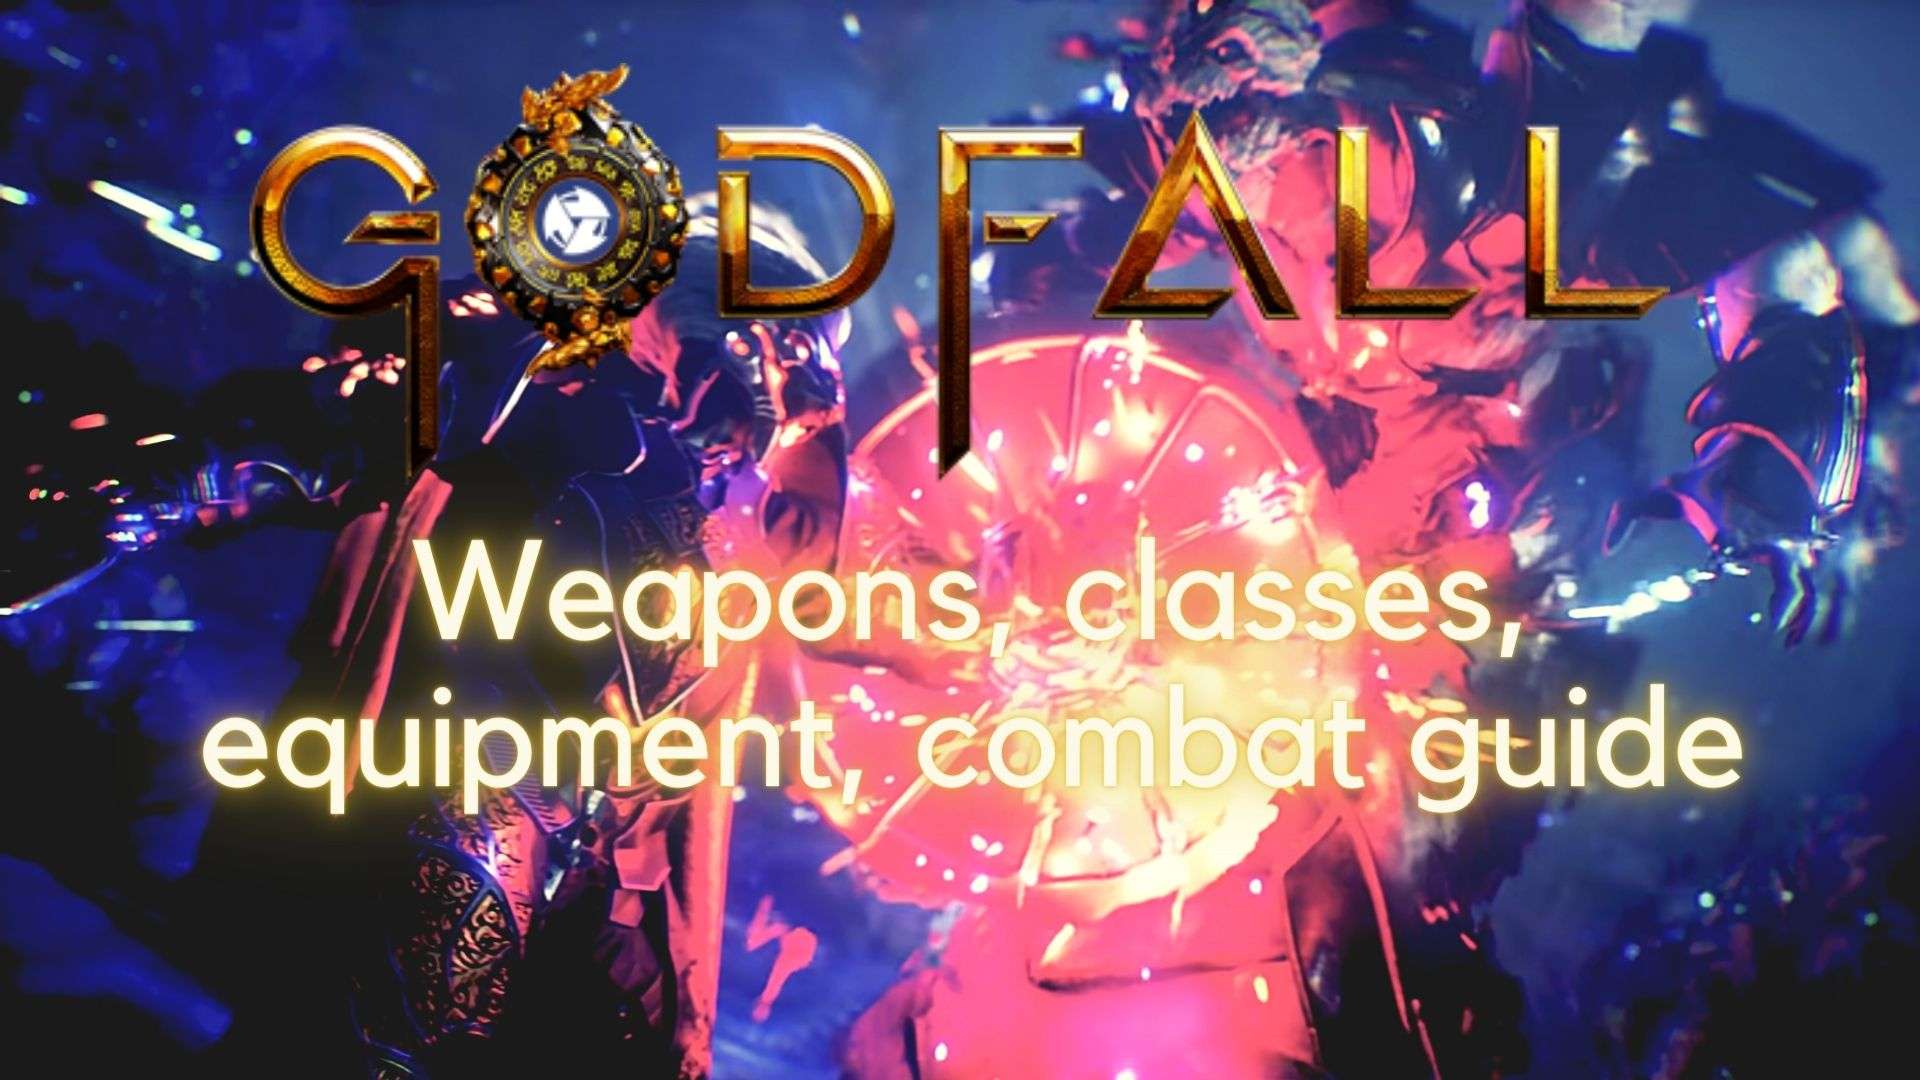 Advertising a Godfall wepaons, classes, equipment, combat guide